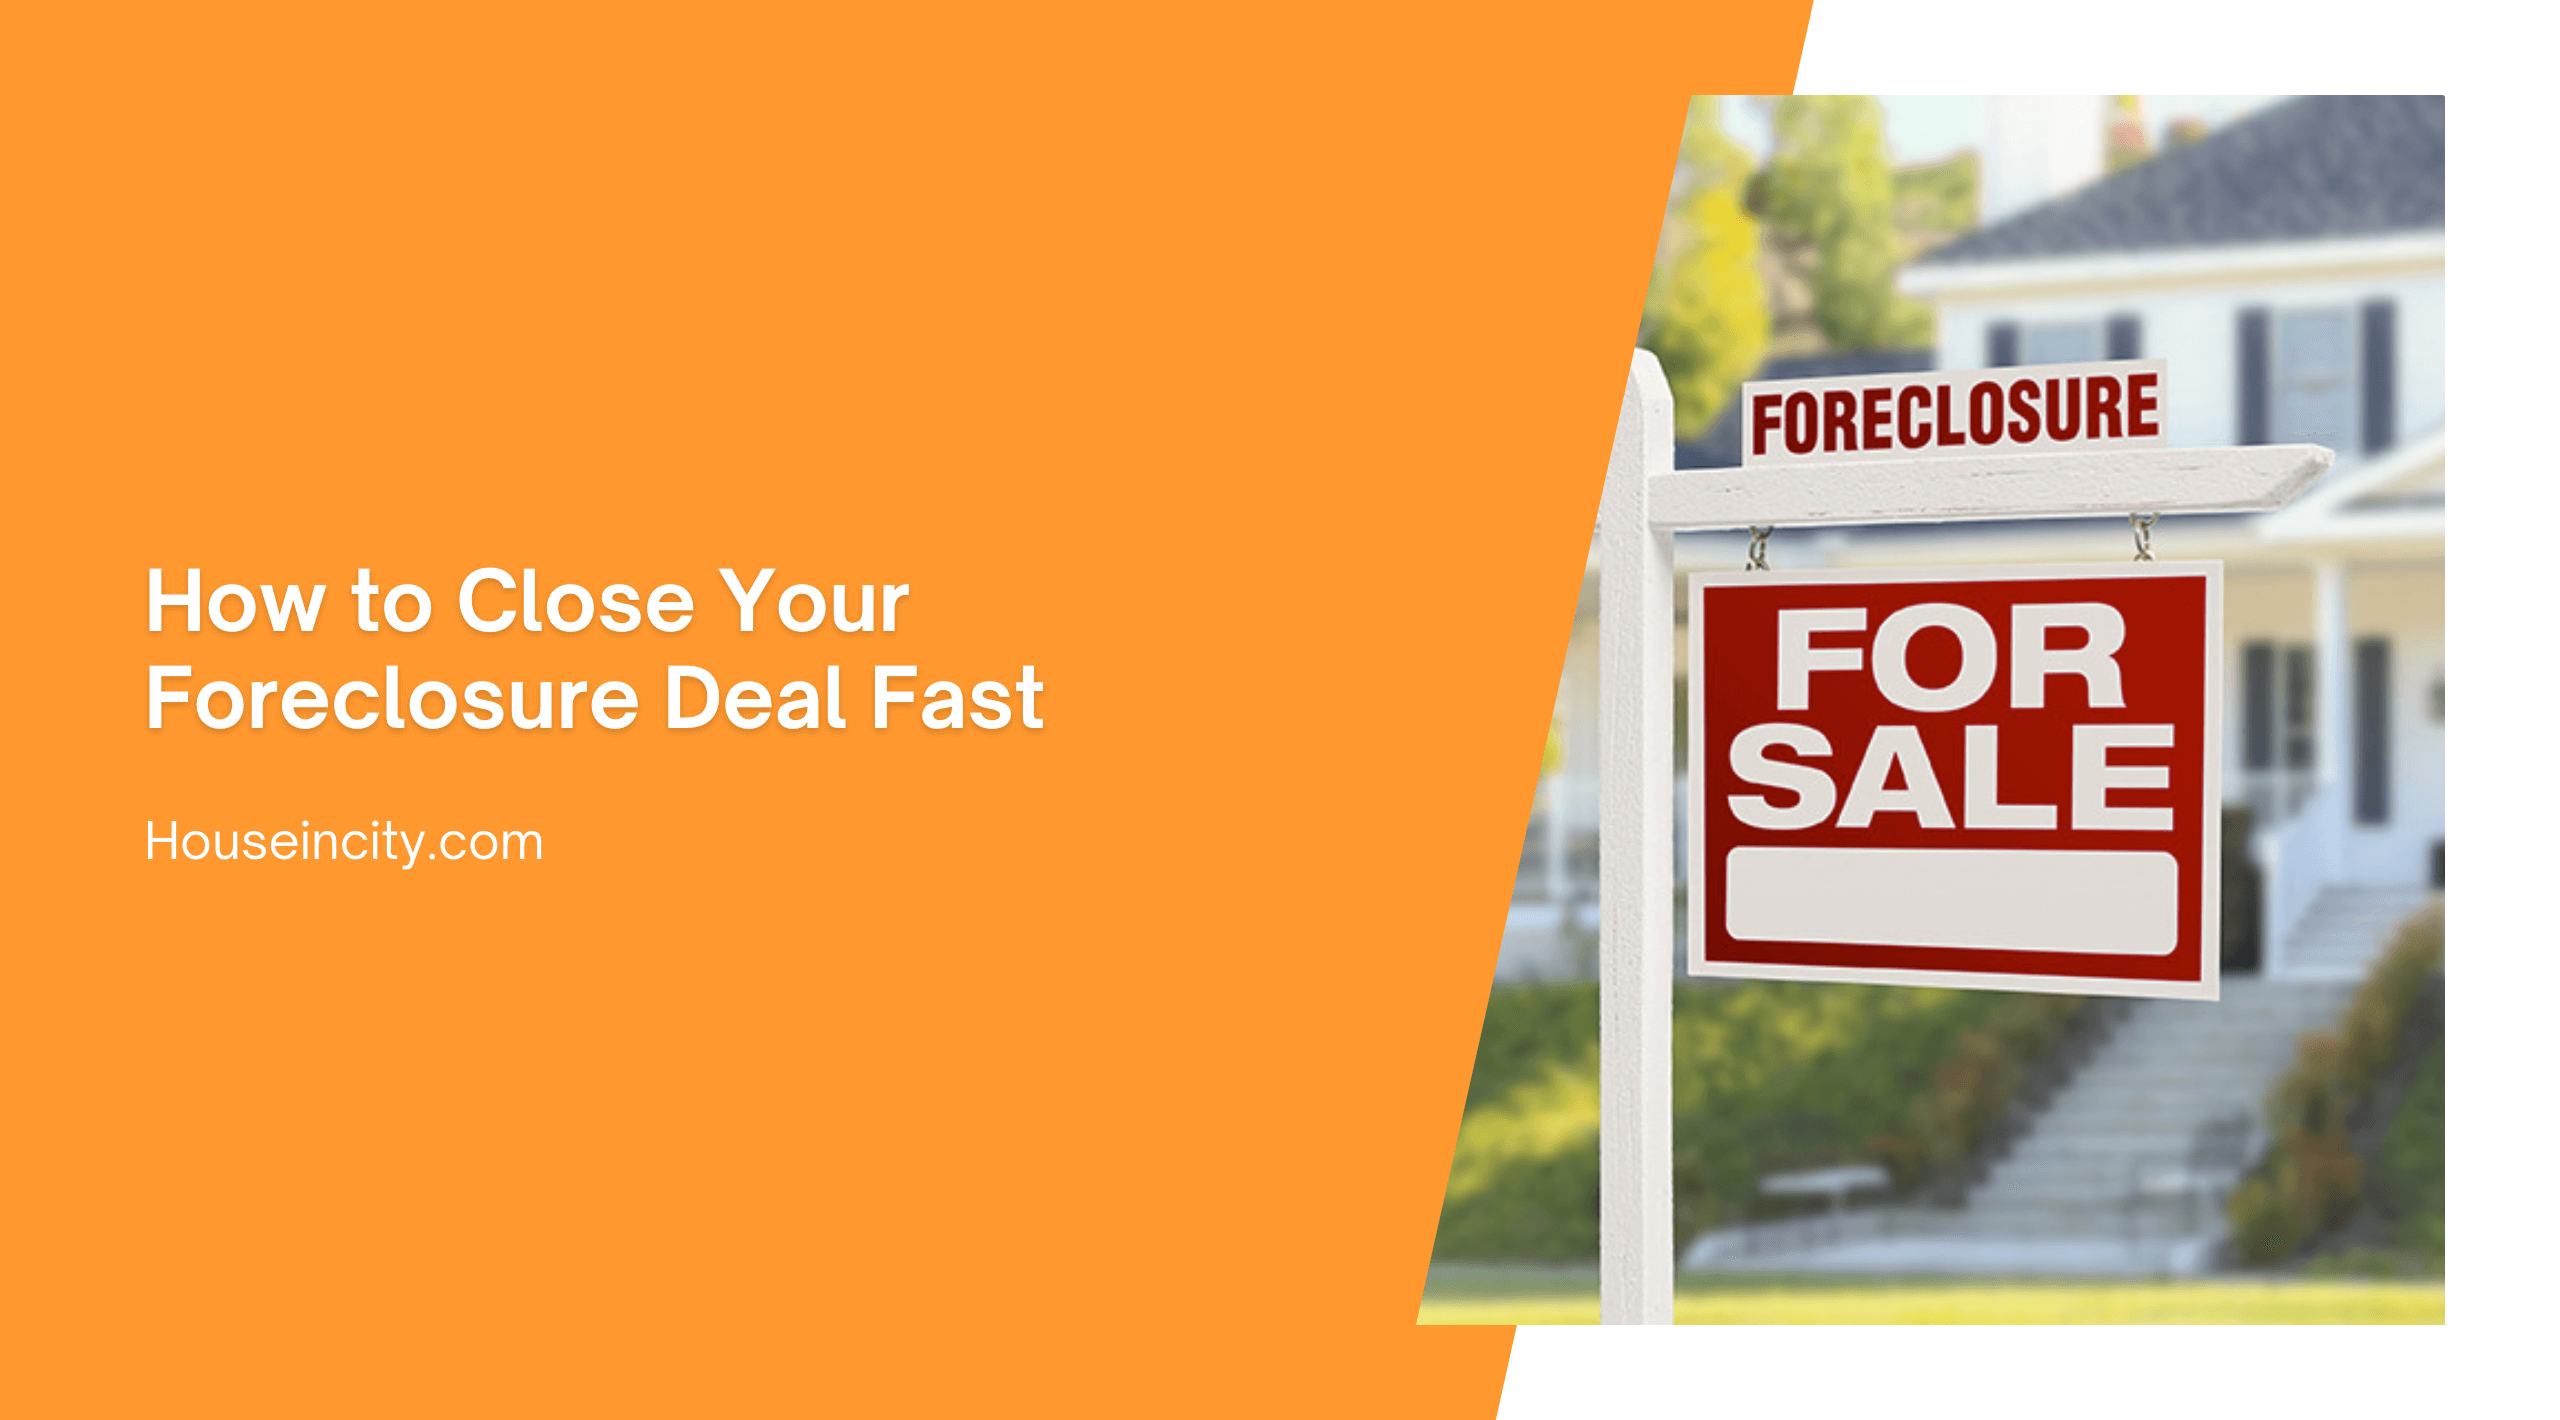 How to Close Your Foreclosure Deal Fast